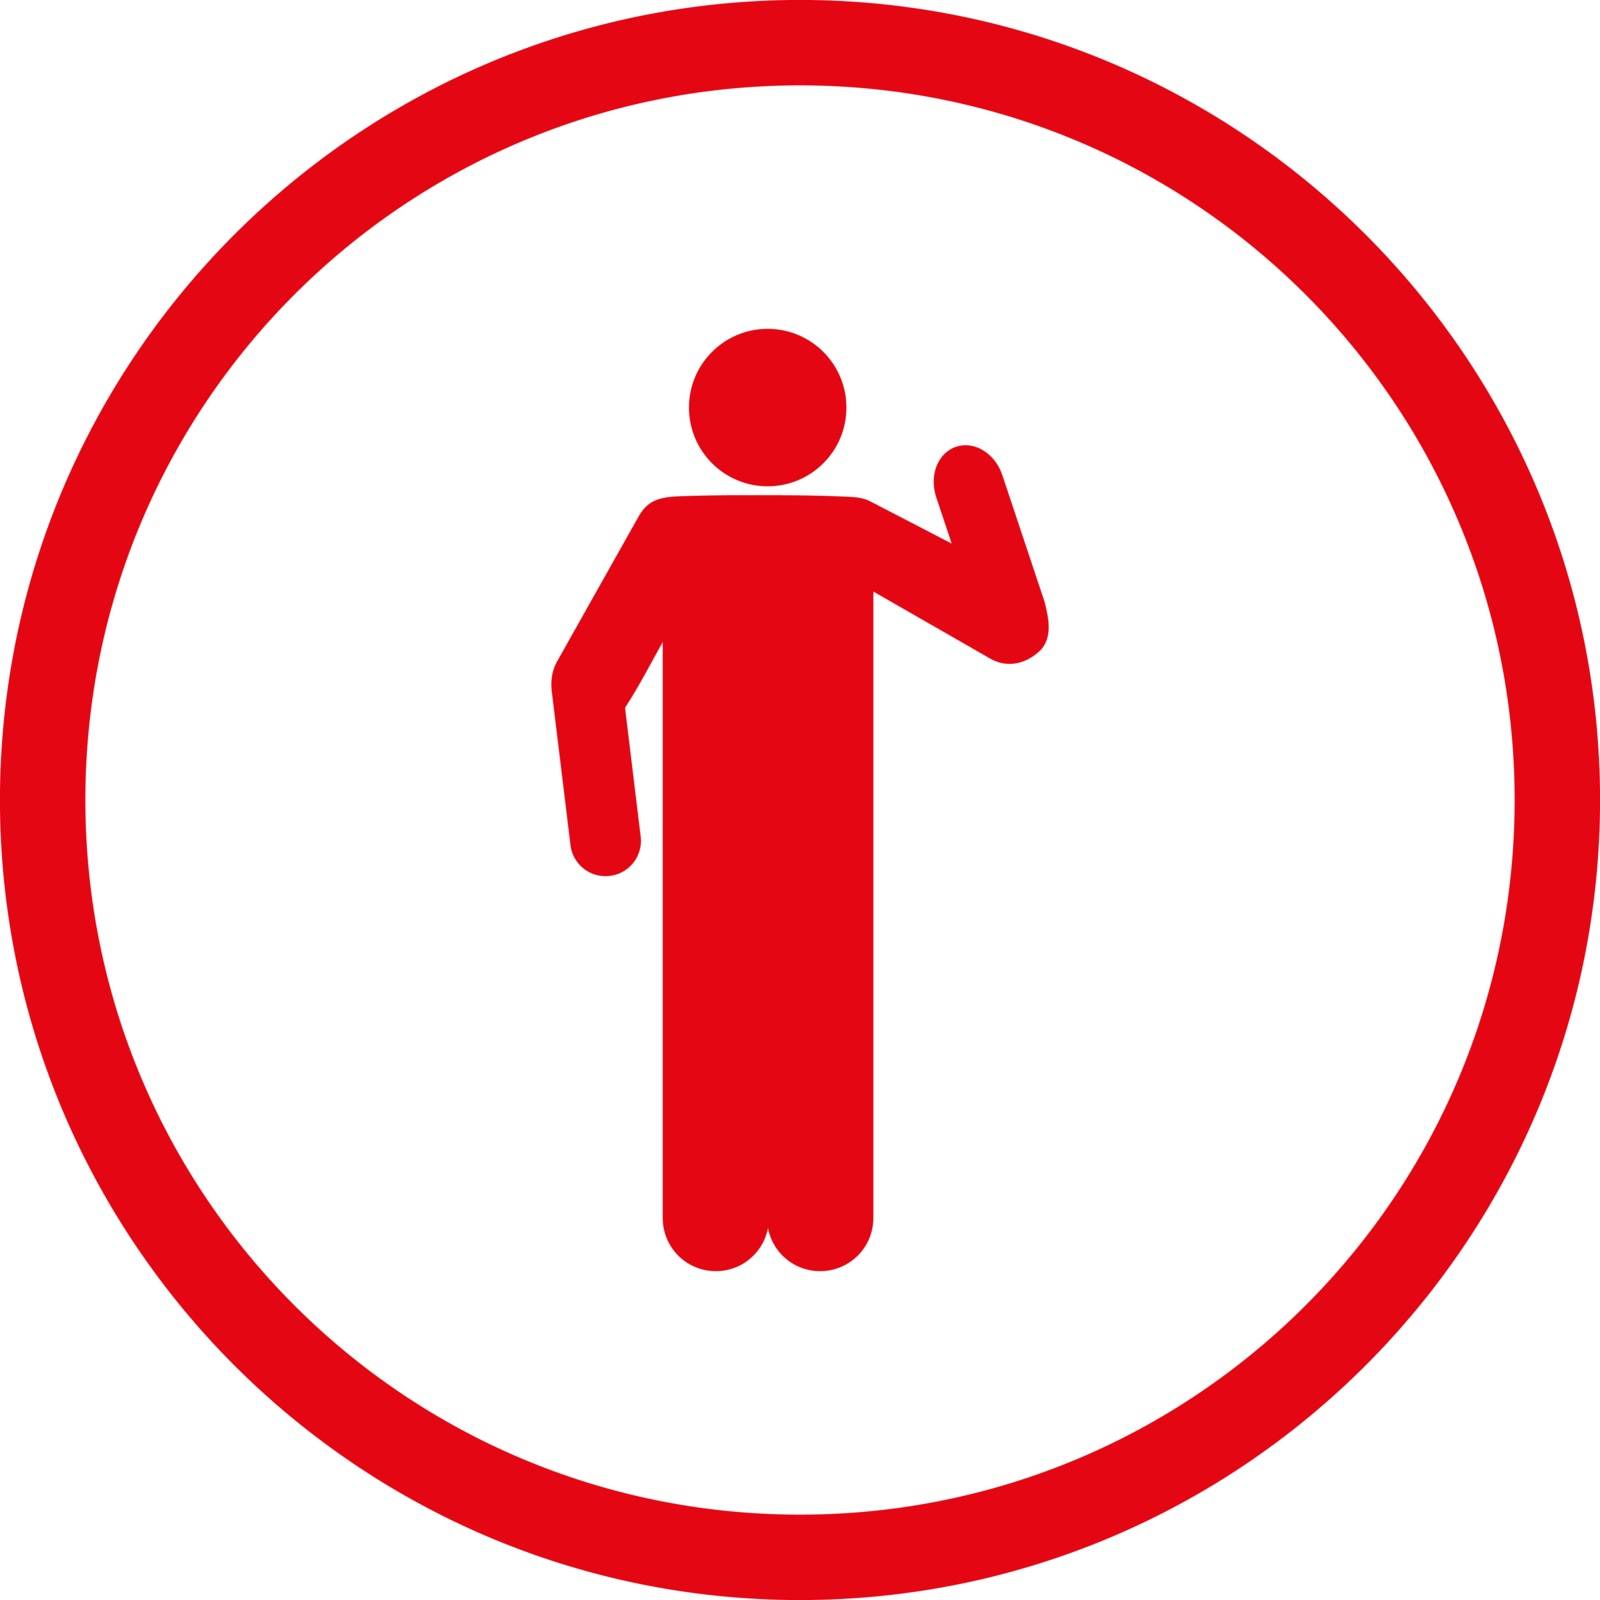 Opinion vector icon. This rounded flat symbol is drawn with red color on a white background.